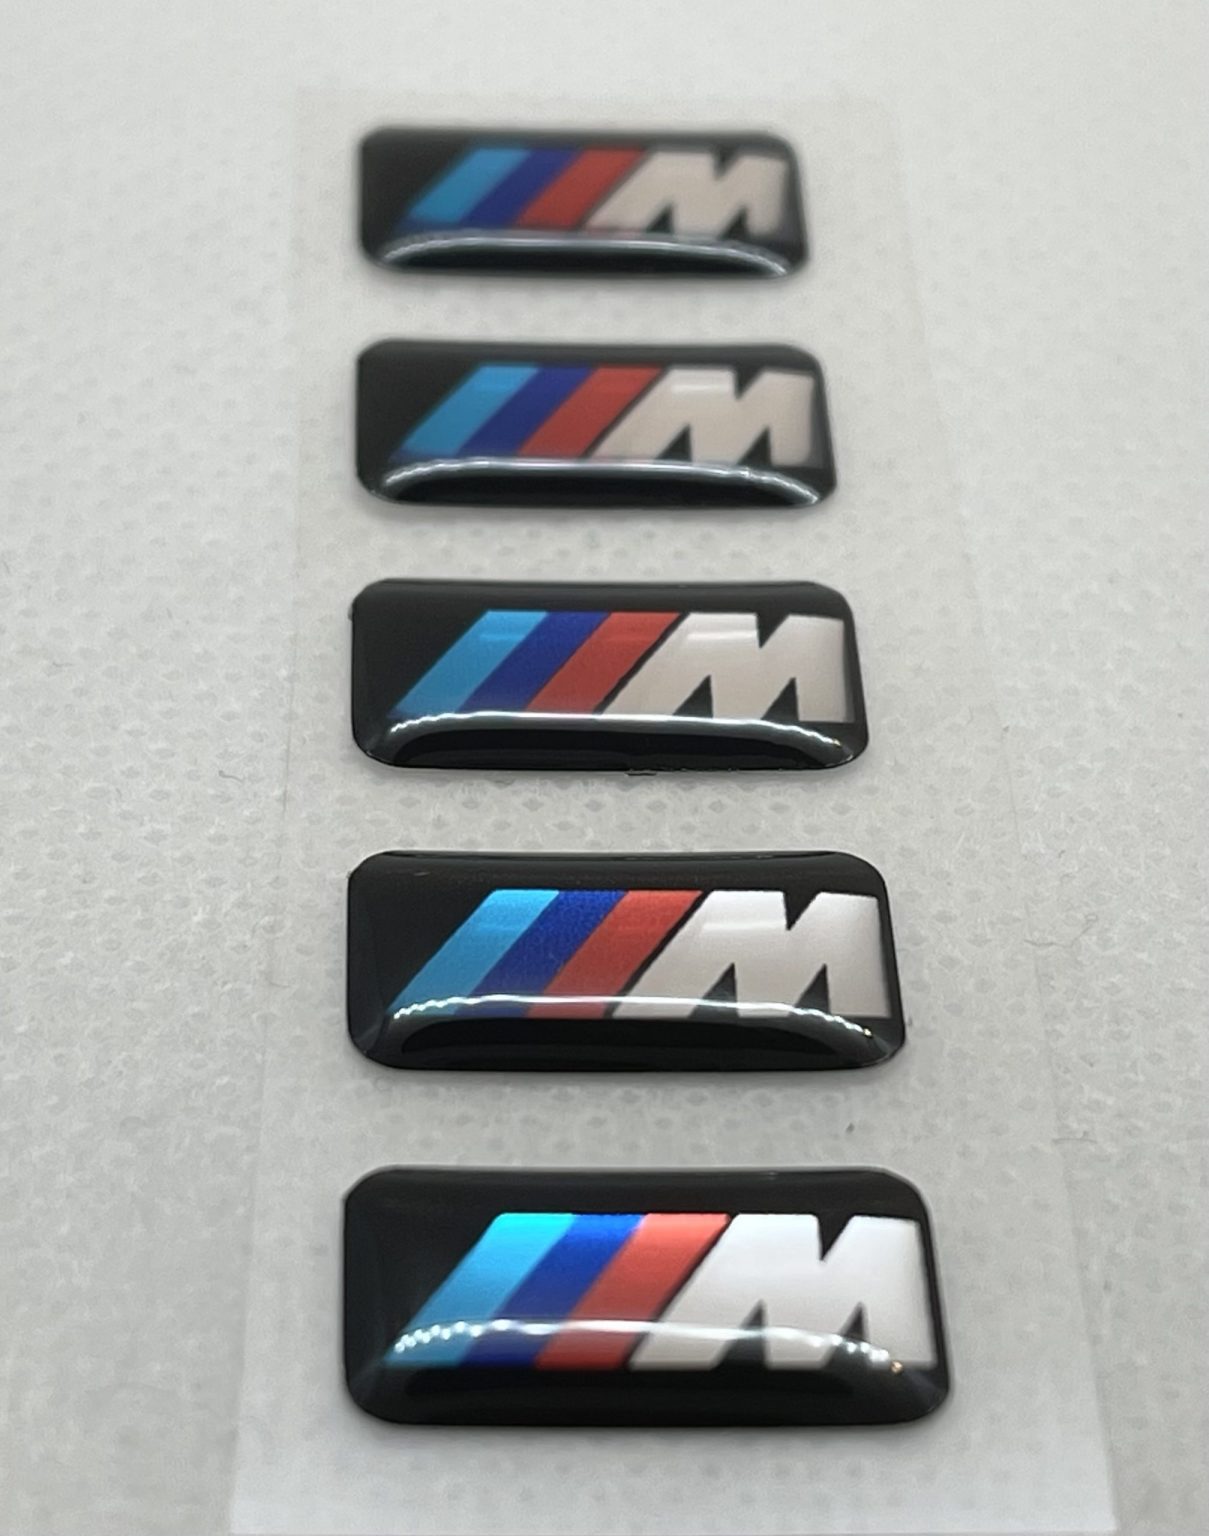 3x Stickers Plaque d'immatriculations 74 BMW M Power 100X45 mm Promo Ref66